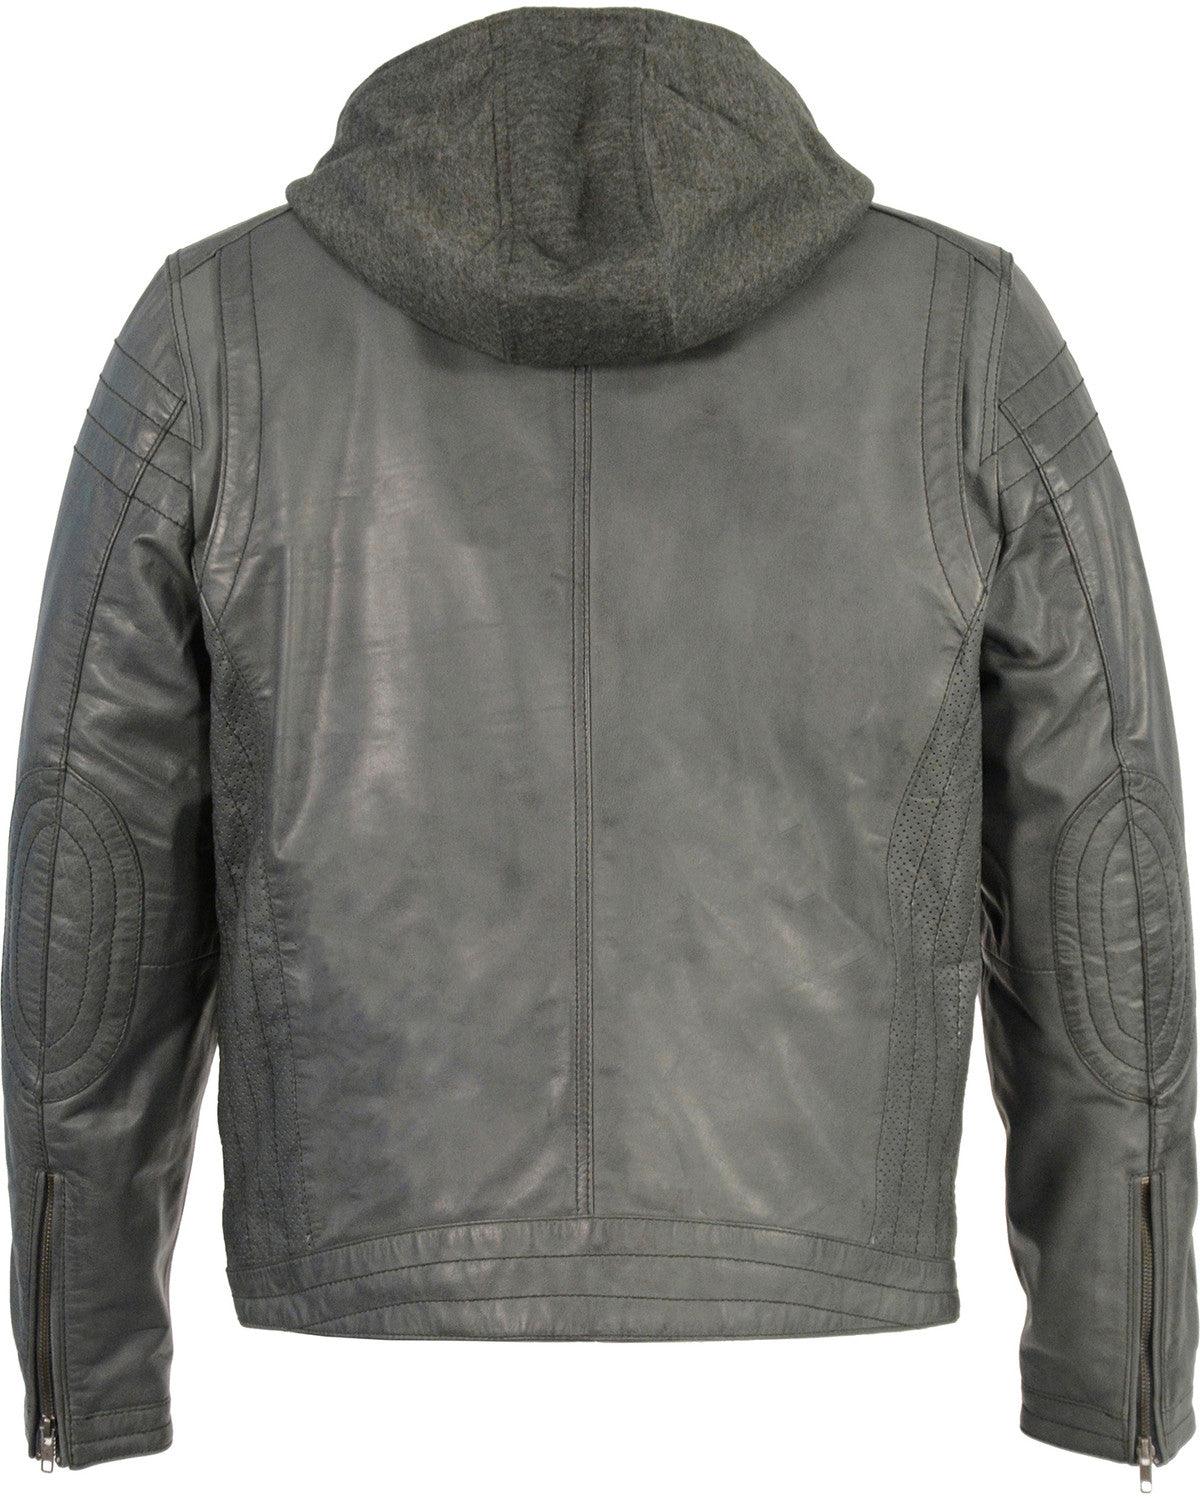 Men's Zipper Front Leather Jacket w/ Removable Hood - Leather Loom